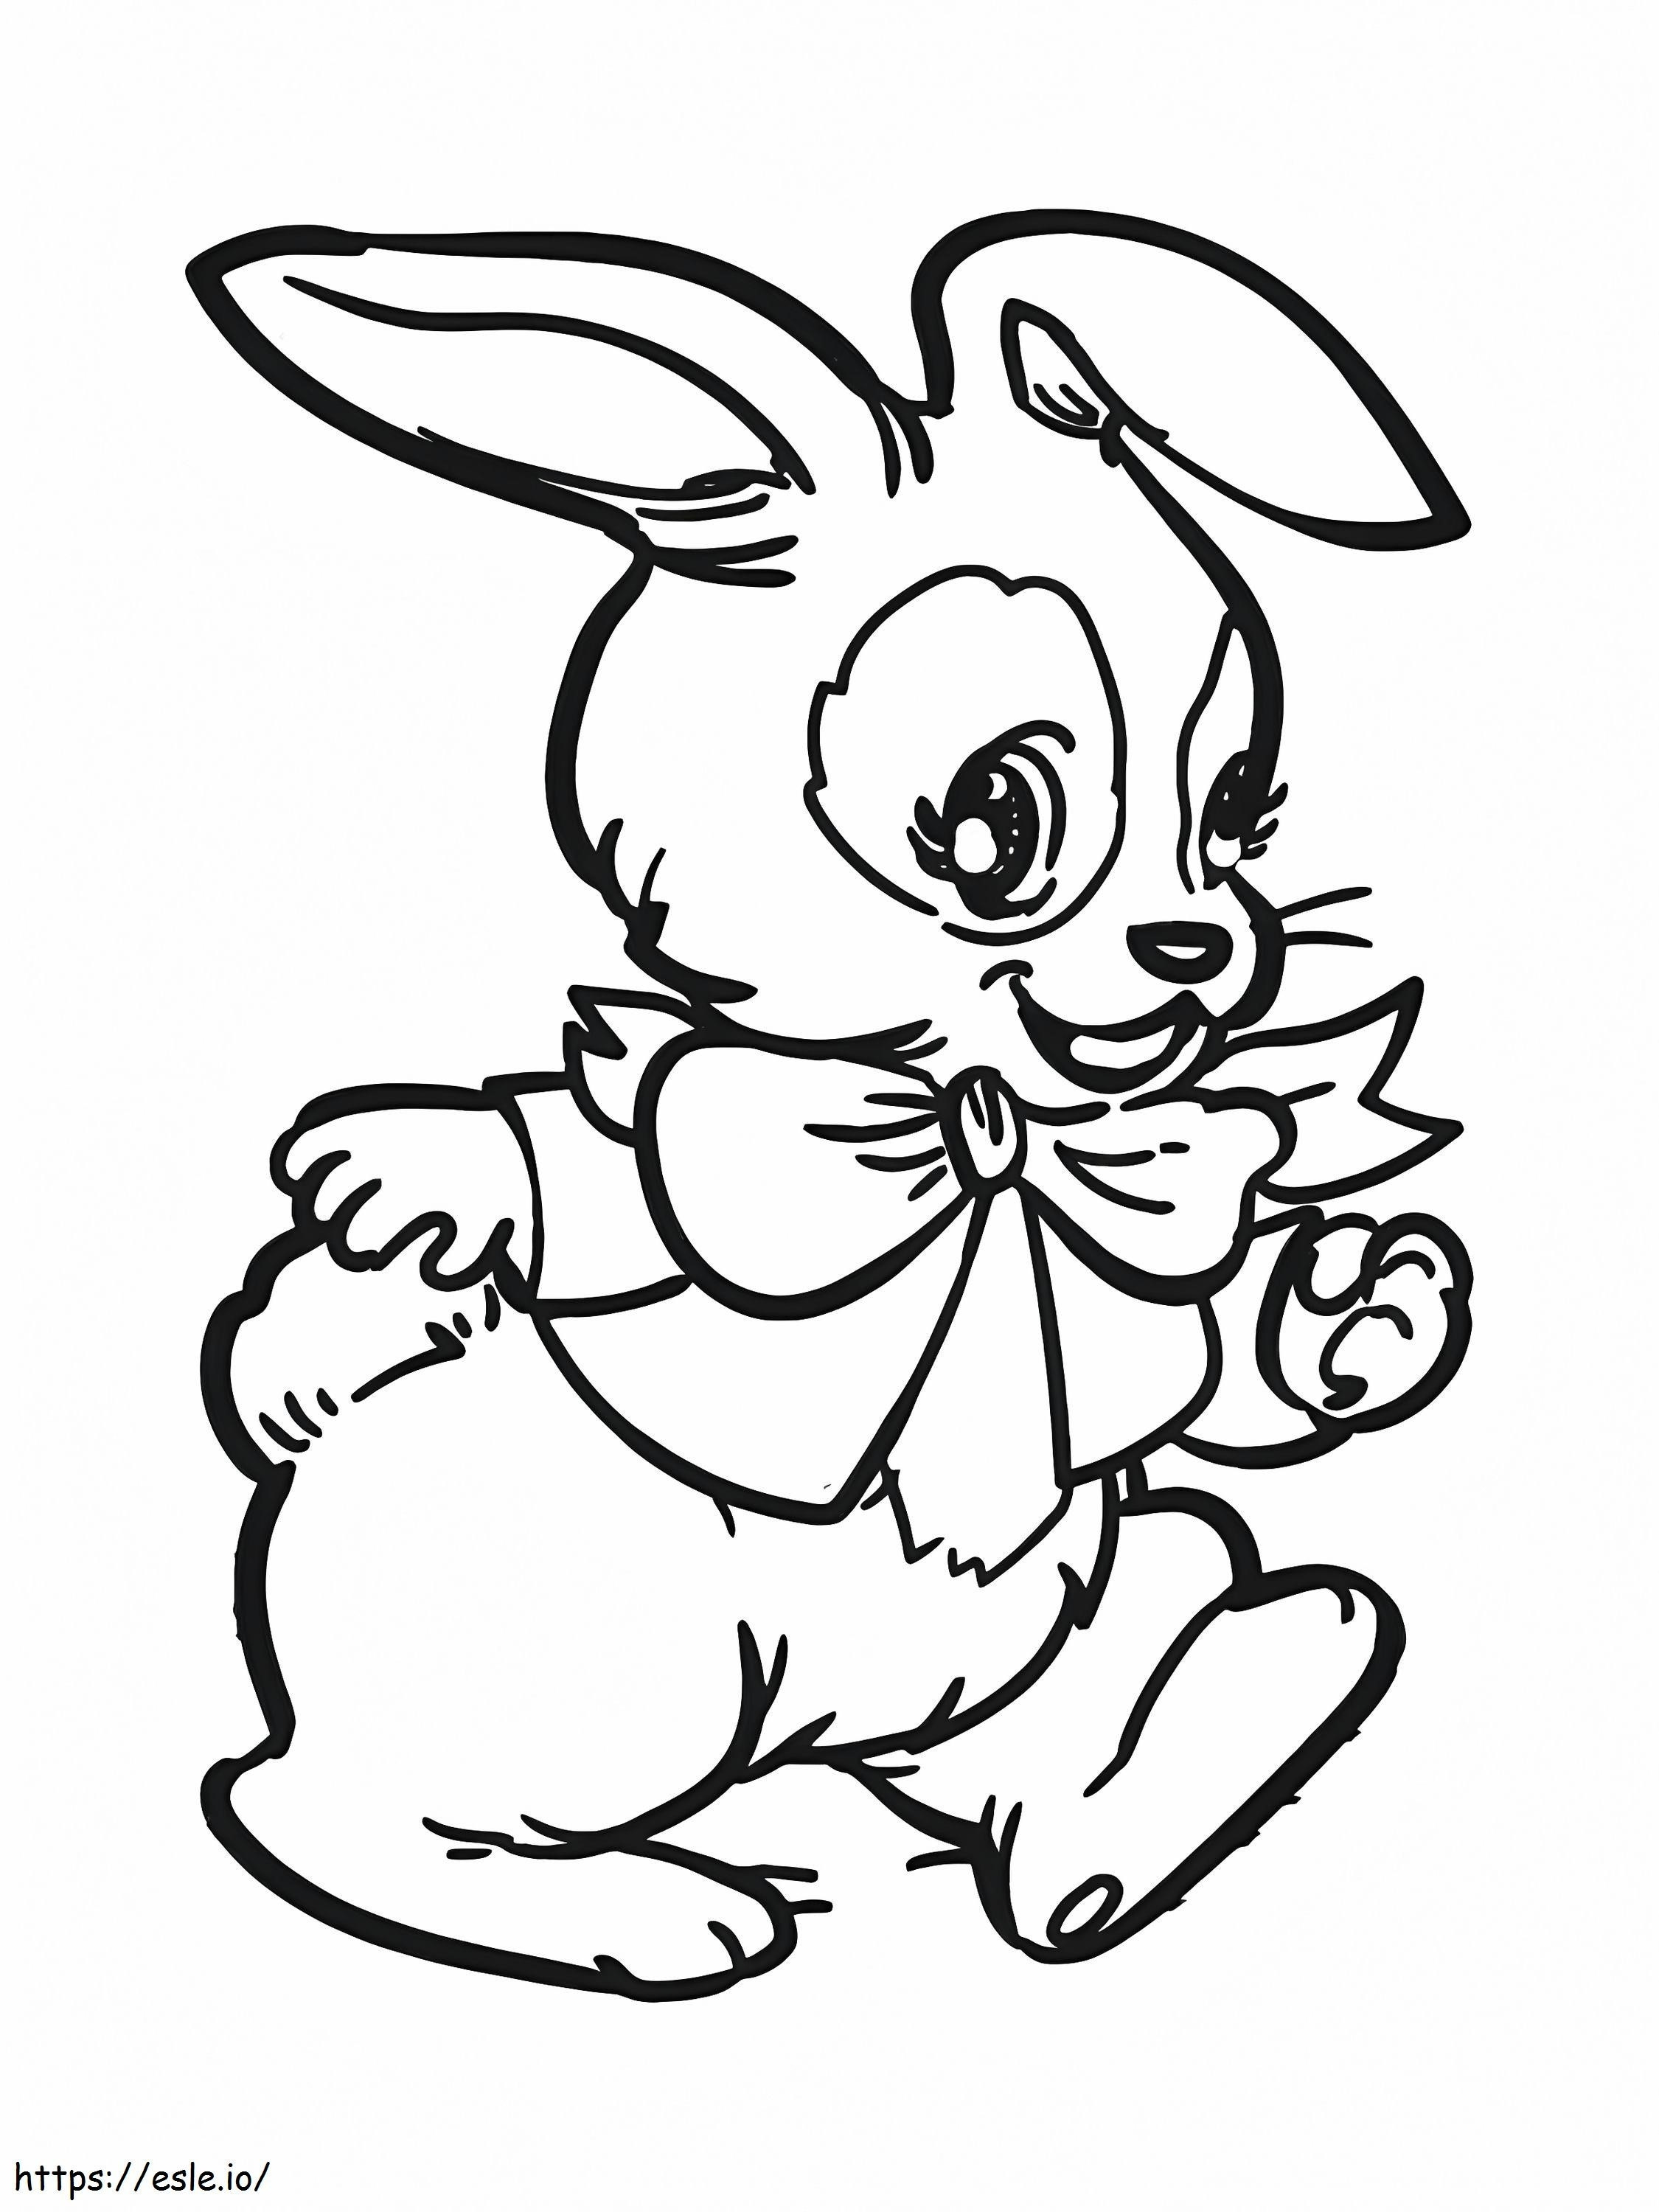 Easter Bunny With Ribbon coloring page